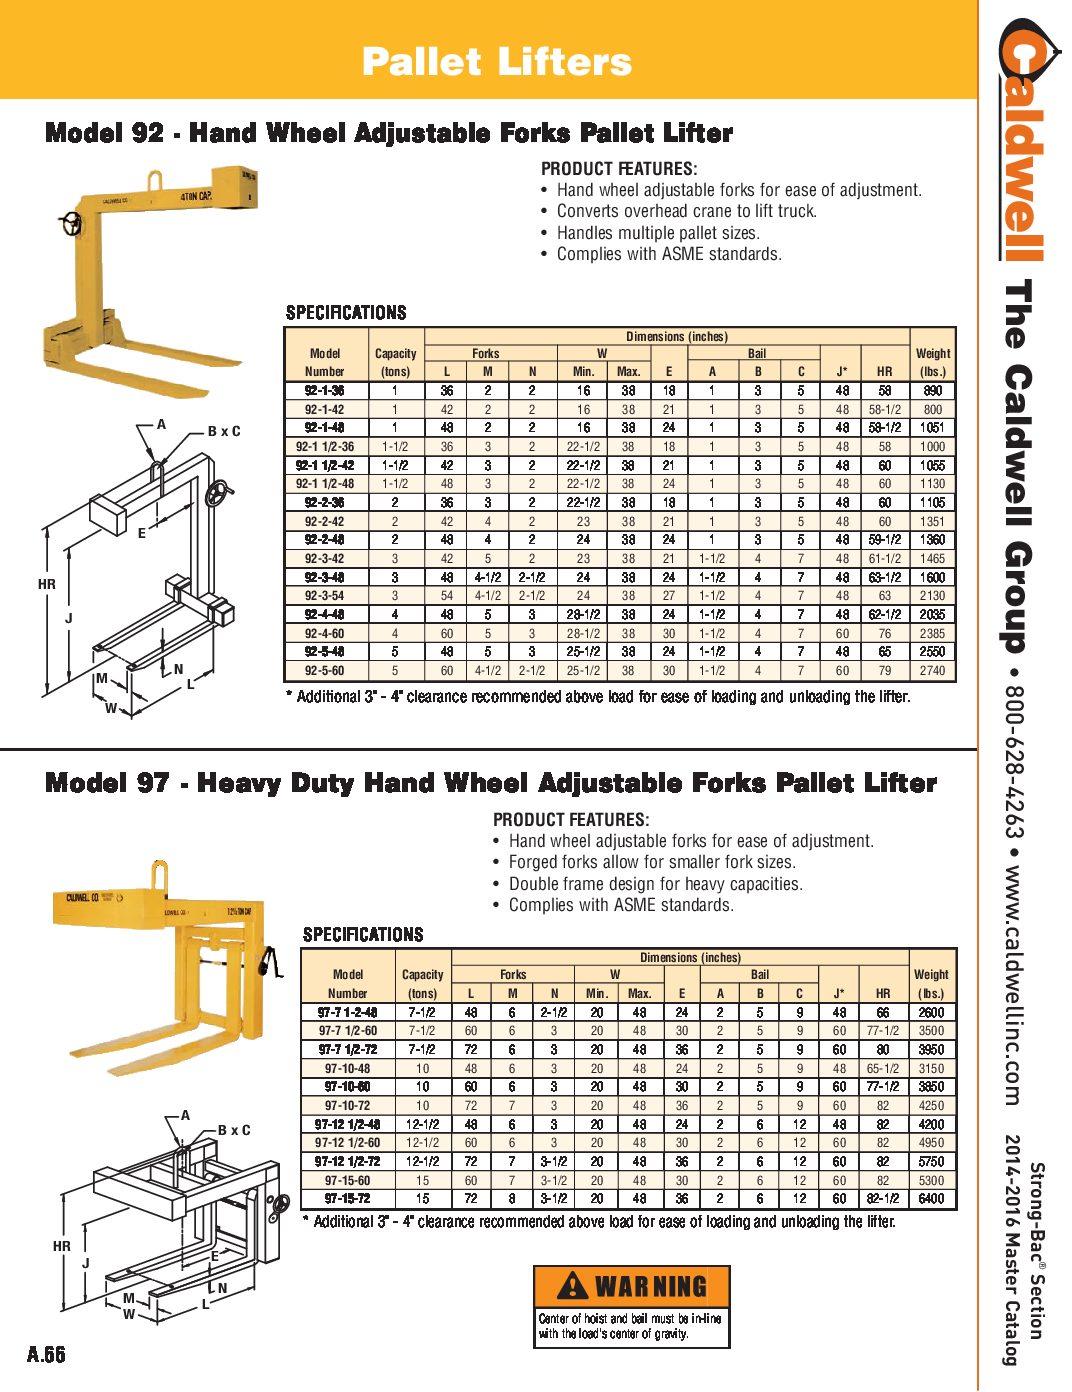 Caldwell STRONG BAC Heavy Duty Hand Wheel Adjustable Forks Pallet Lifter Spread Sheet pdf